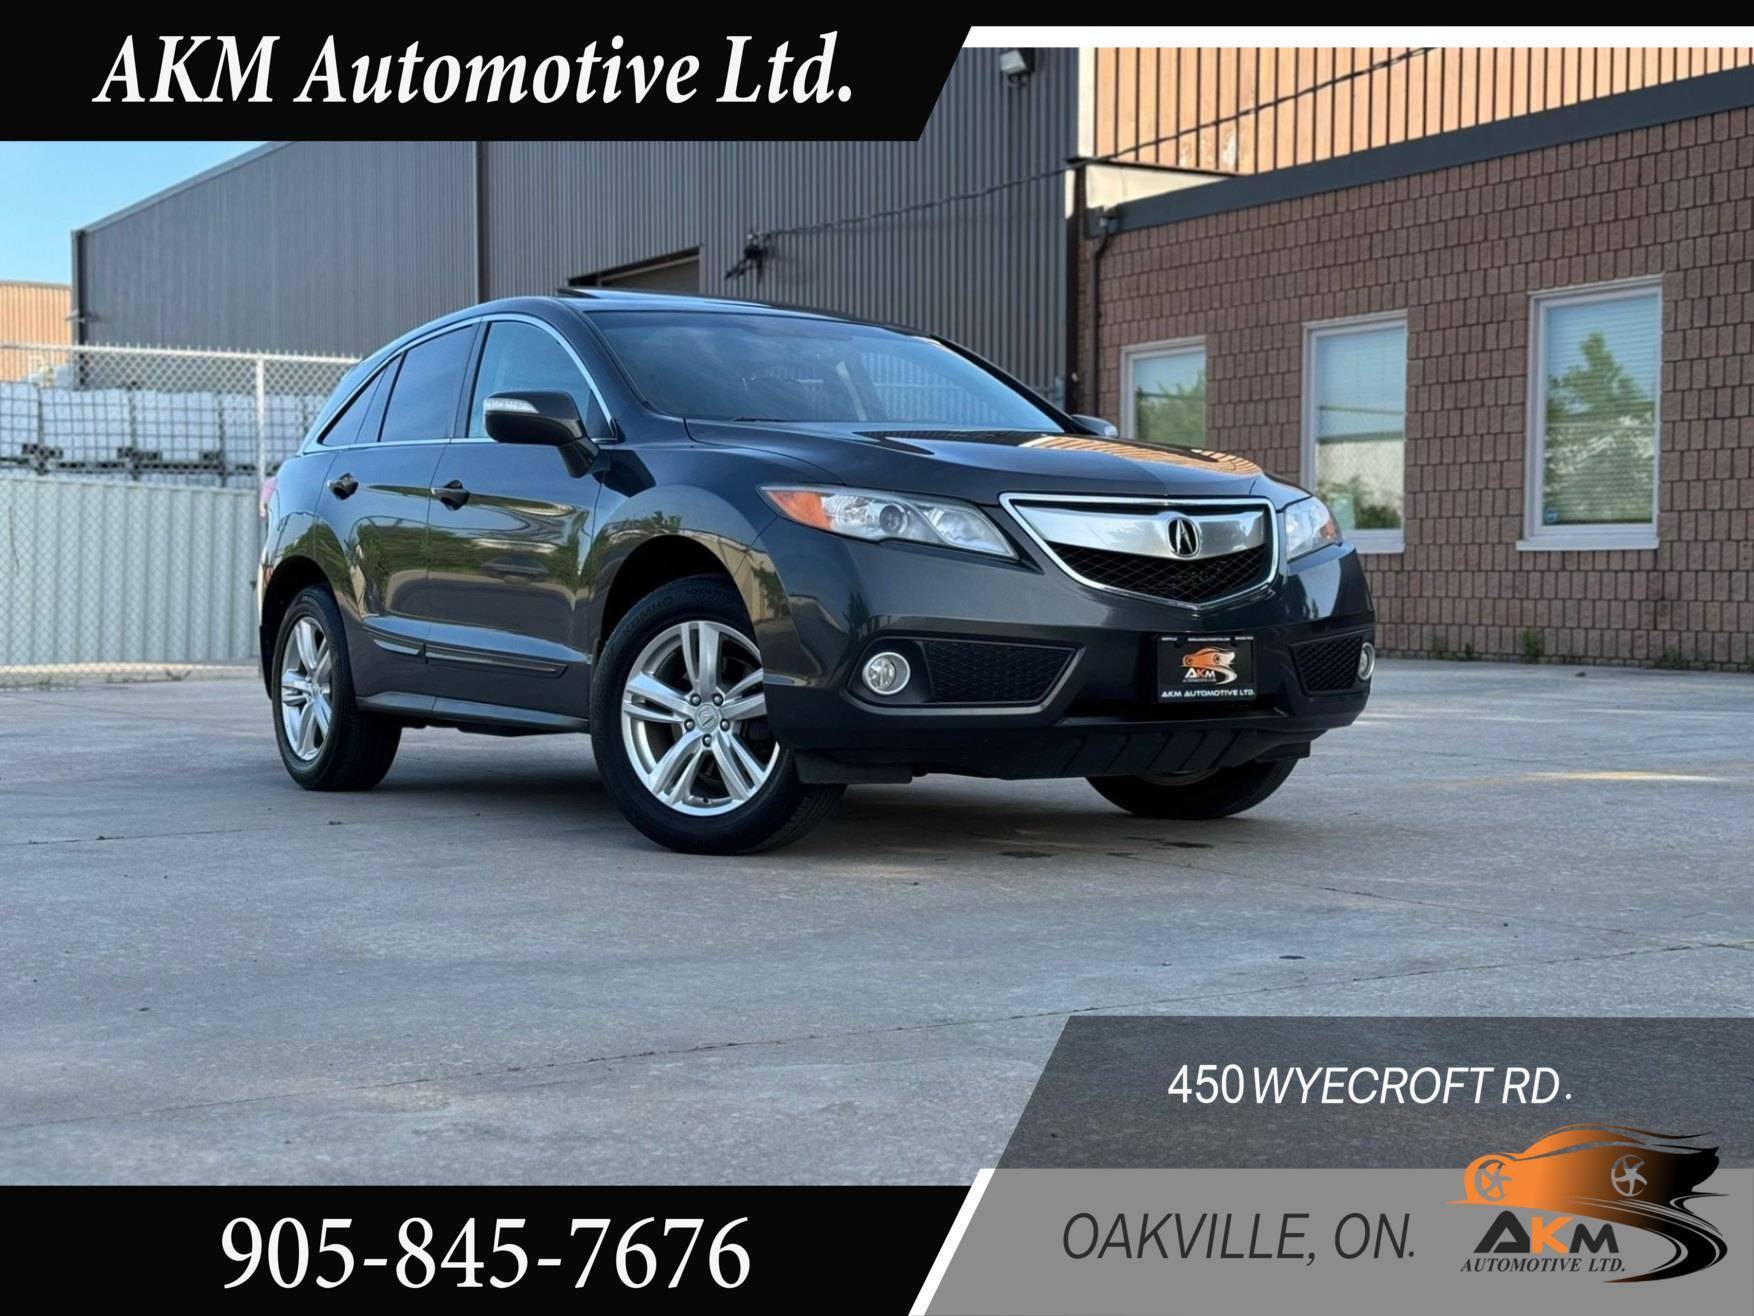 2014 Acura RDX AWD 4dr, Accident Free, Backup Camera, Certified